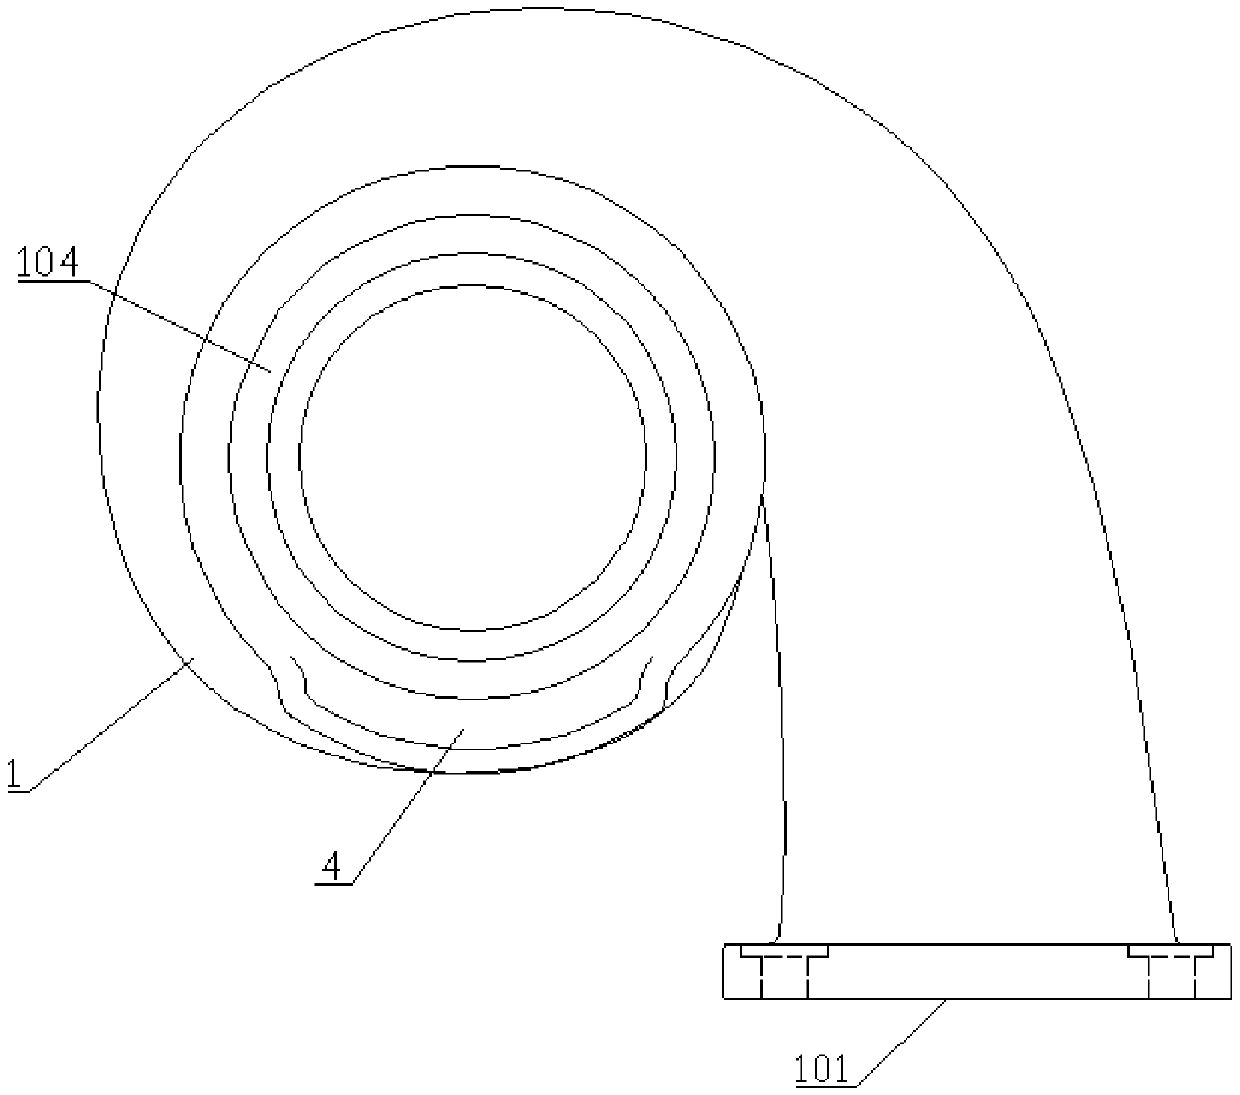 A turbocharger with axially variable section